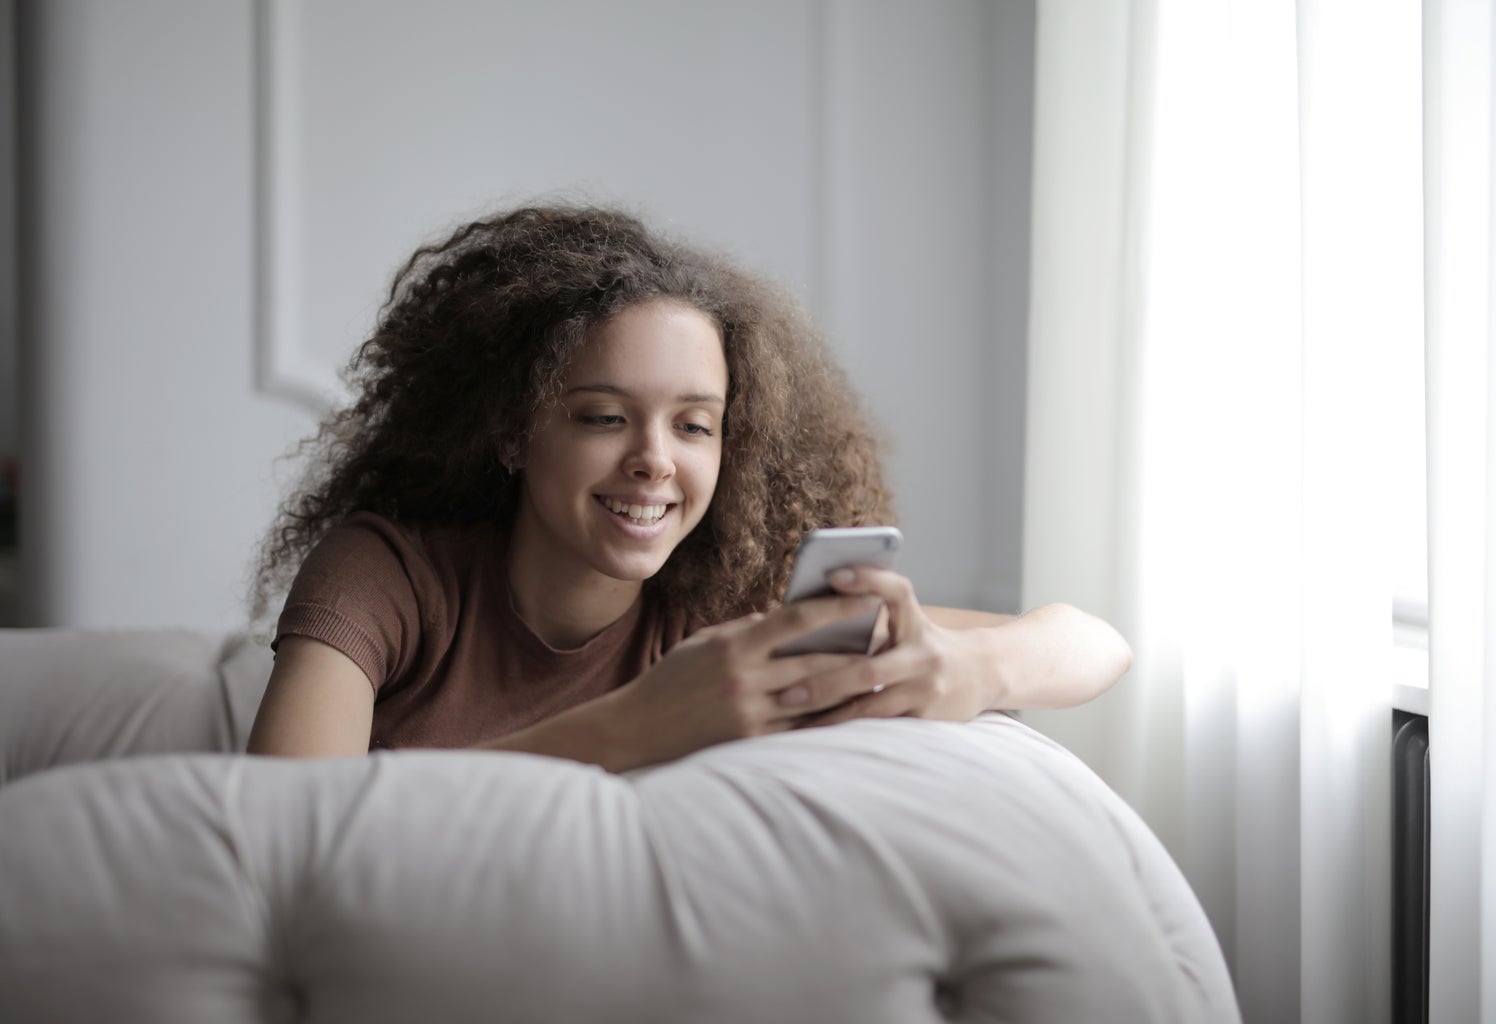 young woman holding phone on couch